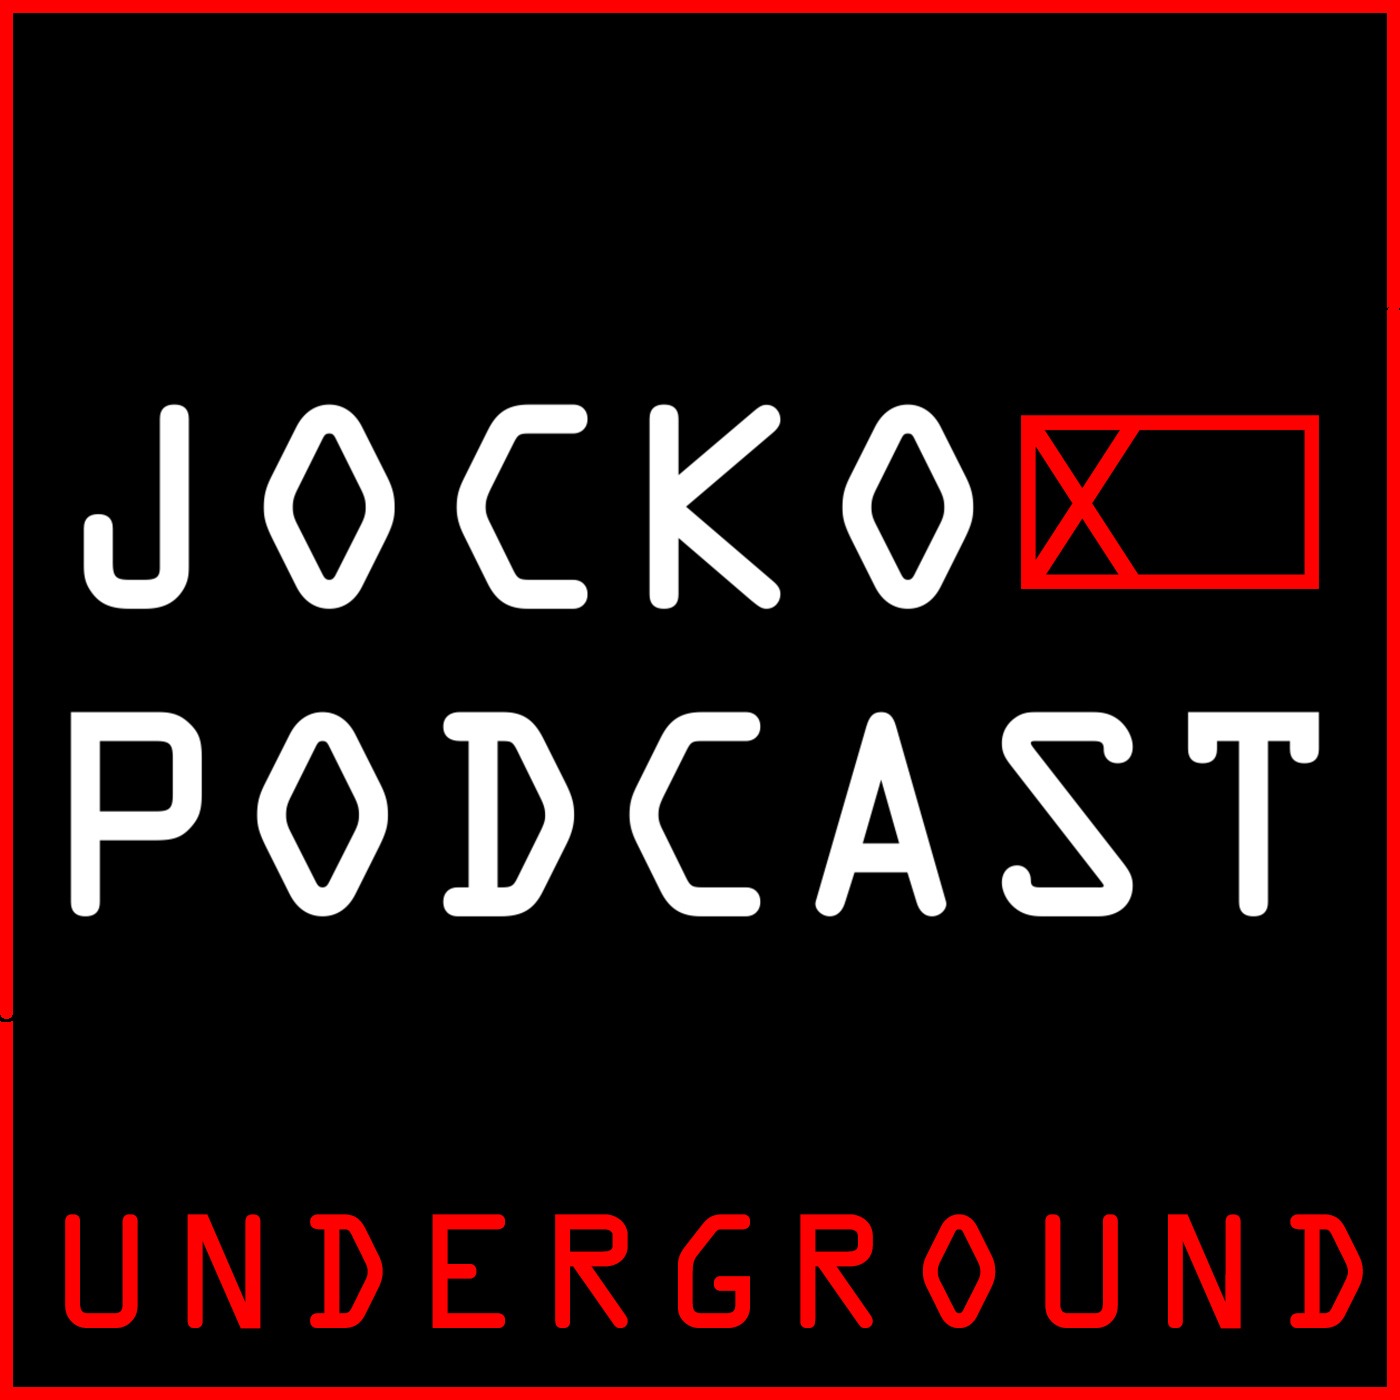 Jocko Underground: How Movies Might Influence You. Slackers! Being A Team Player Is Hard, but Worth It.